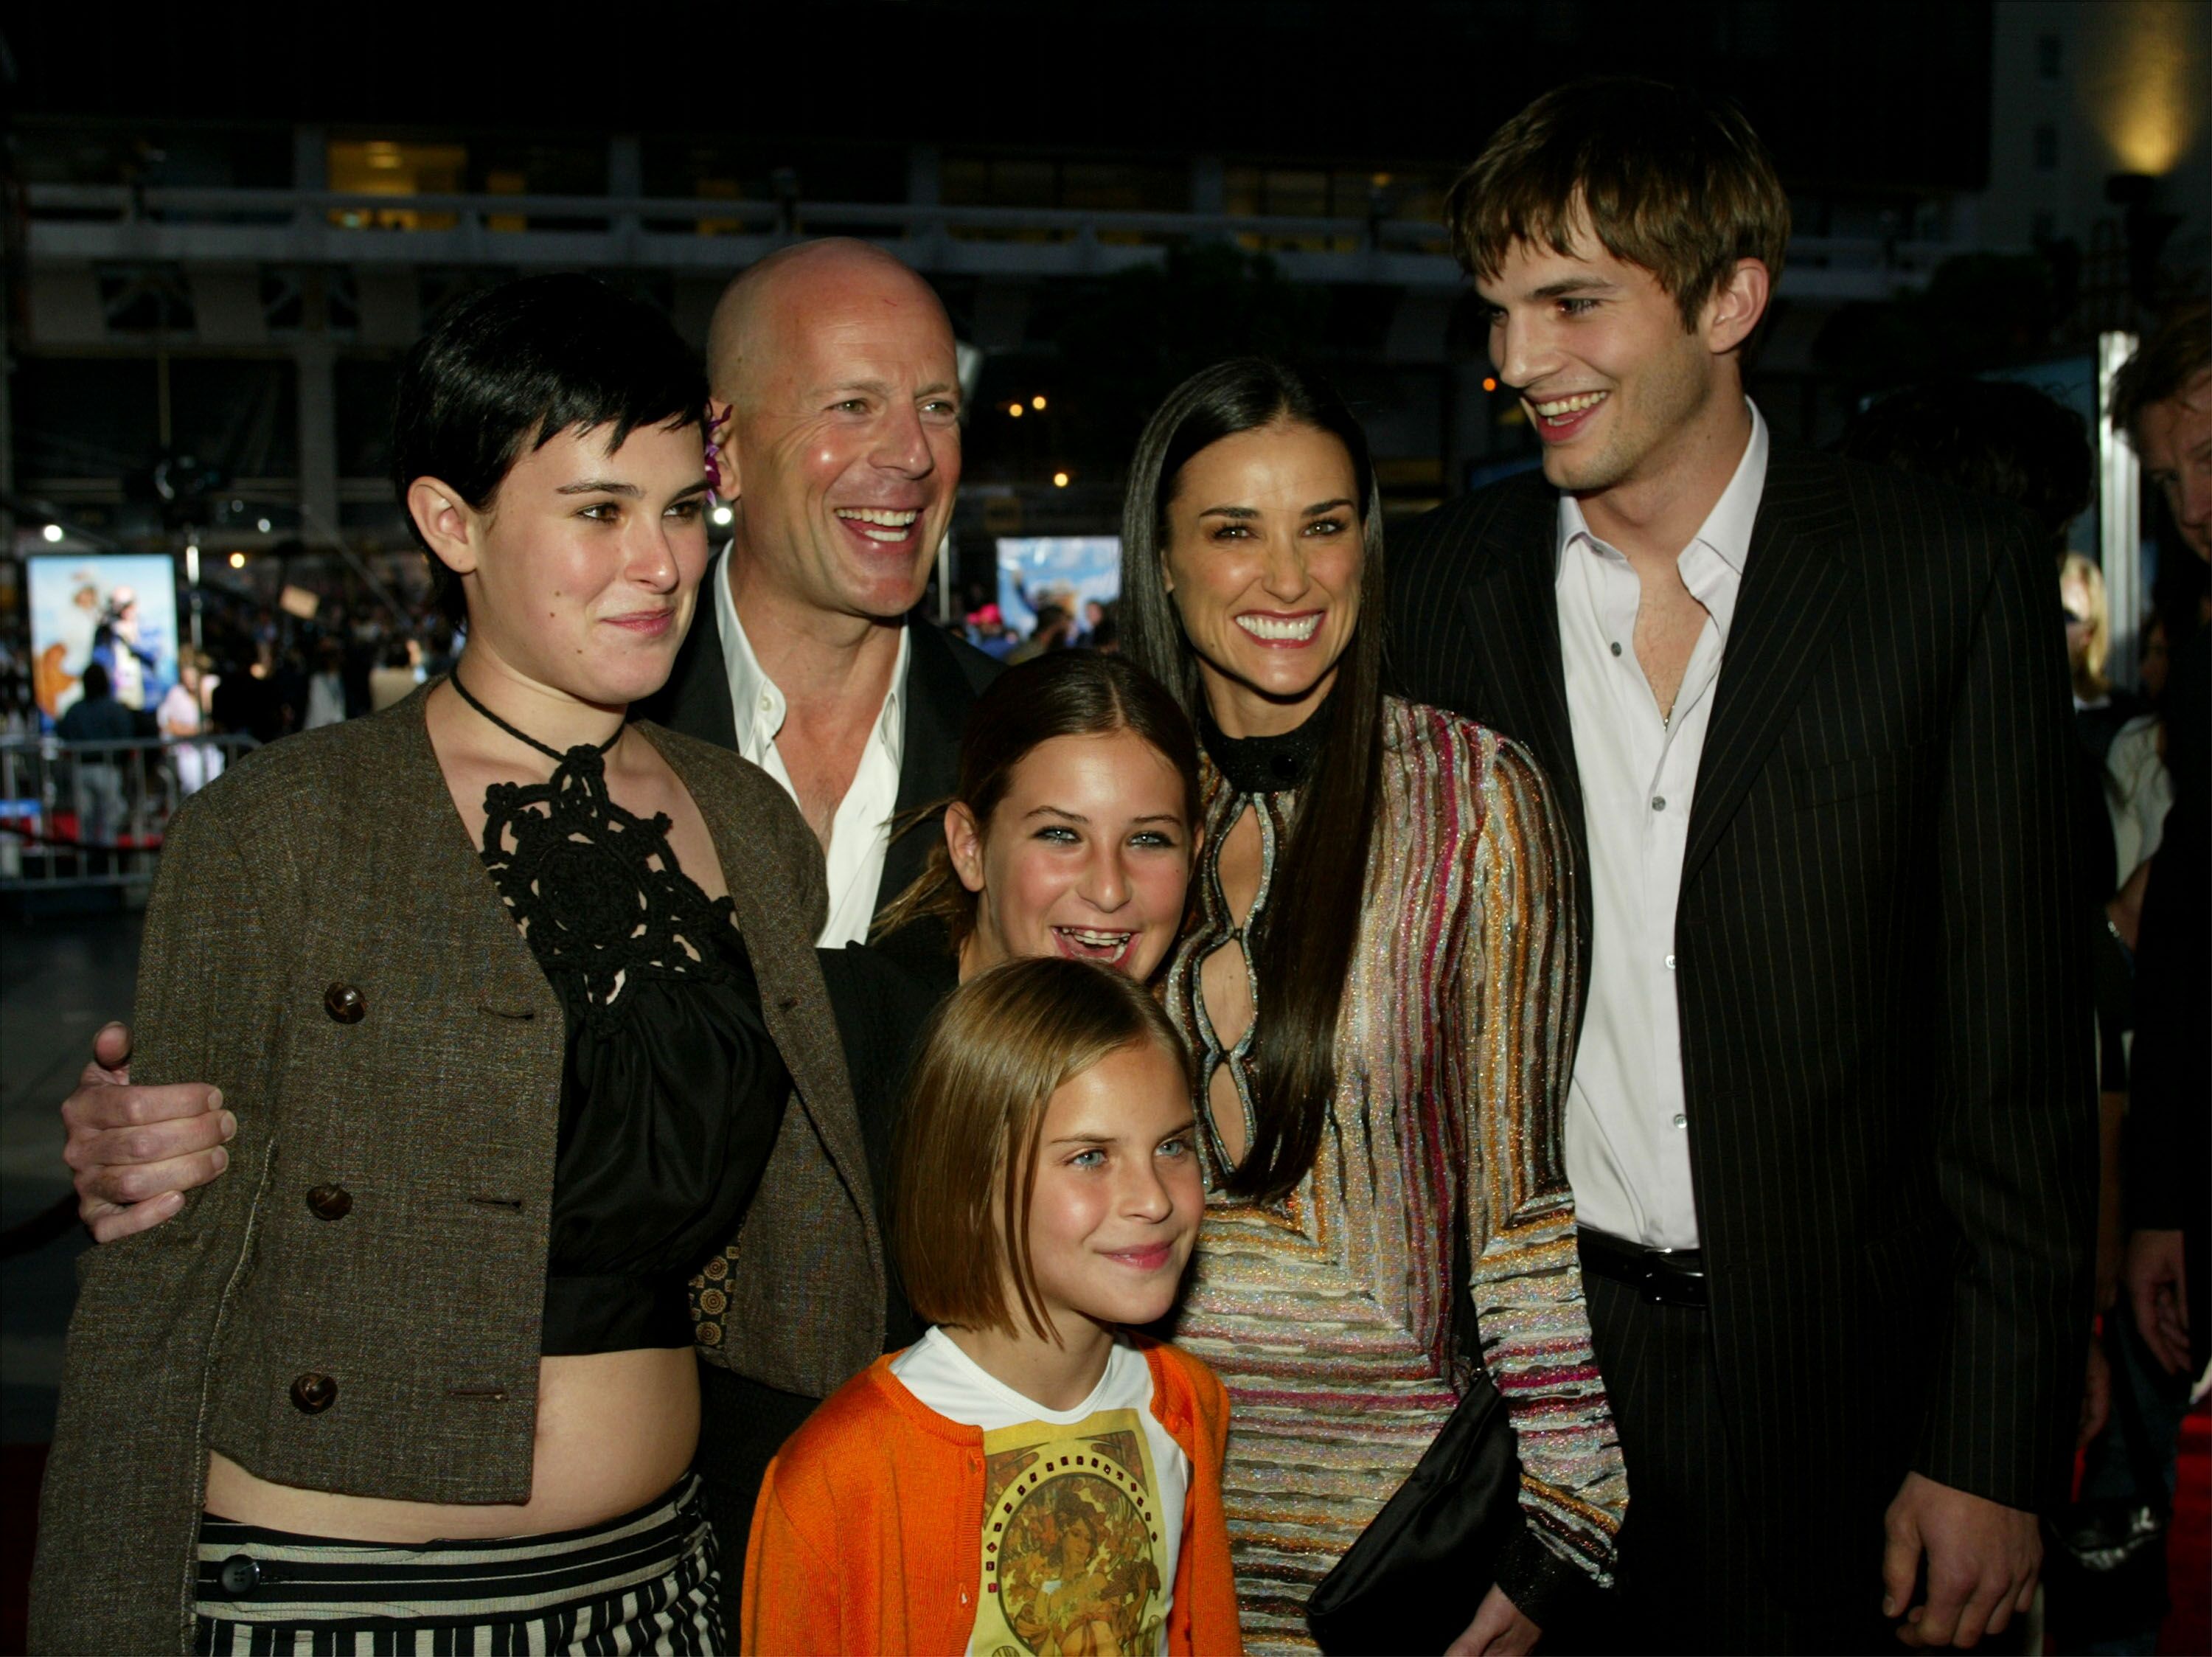 Bruce Willis, Ashton Kutcher, and Demi Moore with daughters at the Red Carpet (premiere) of Charlie's Angels 2 - Full Throttle." | Source: Getty Images